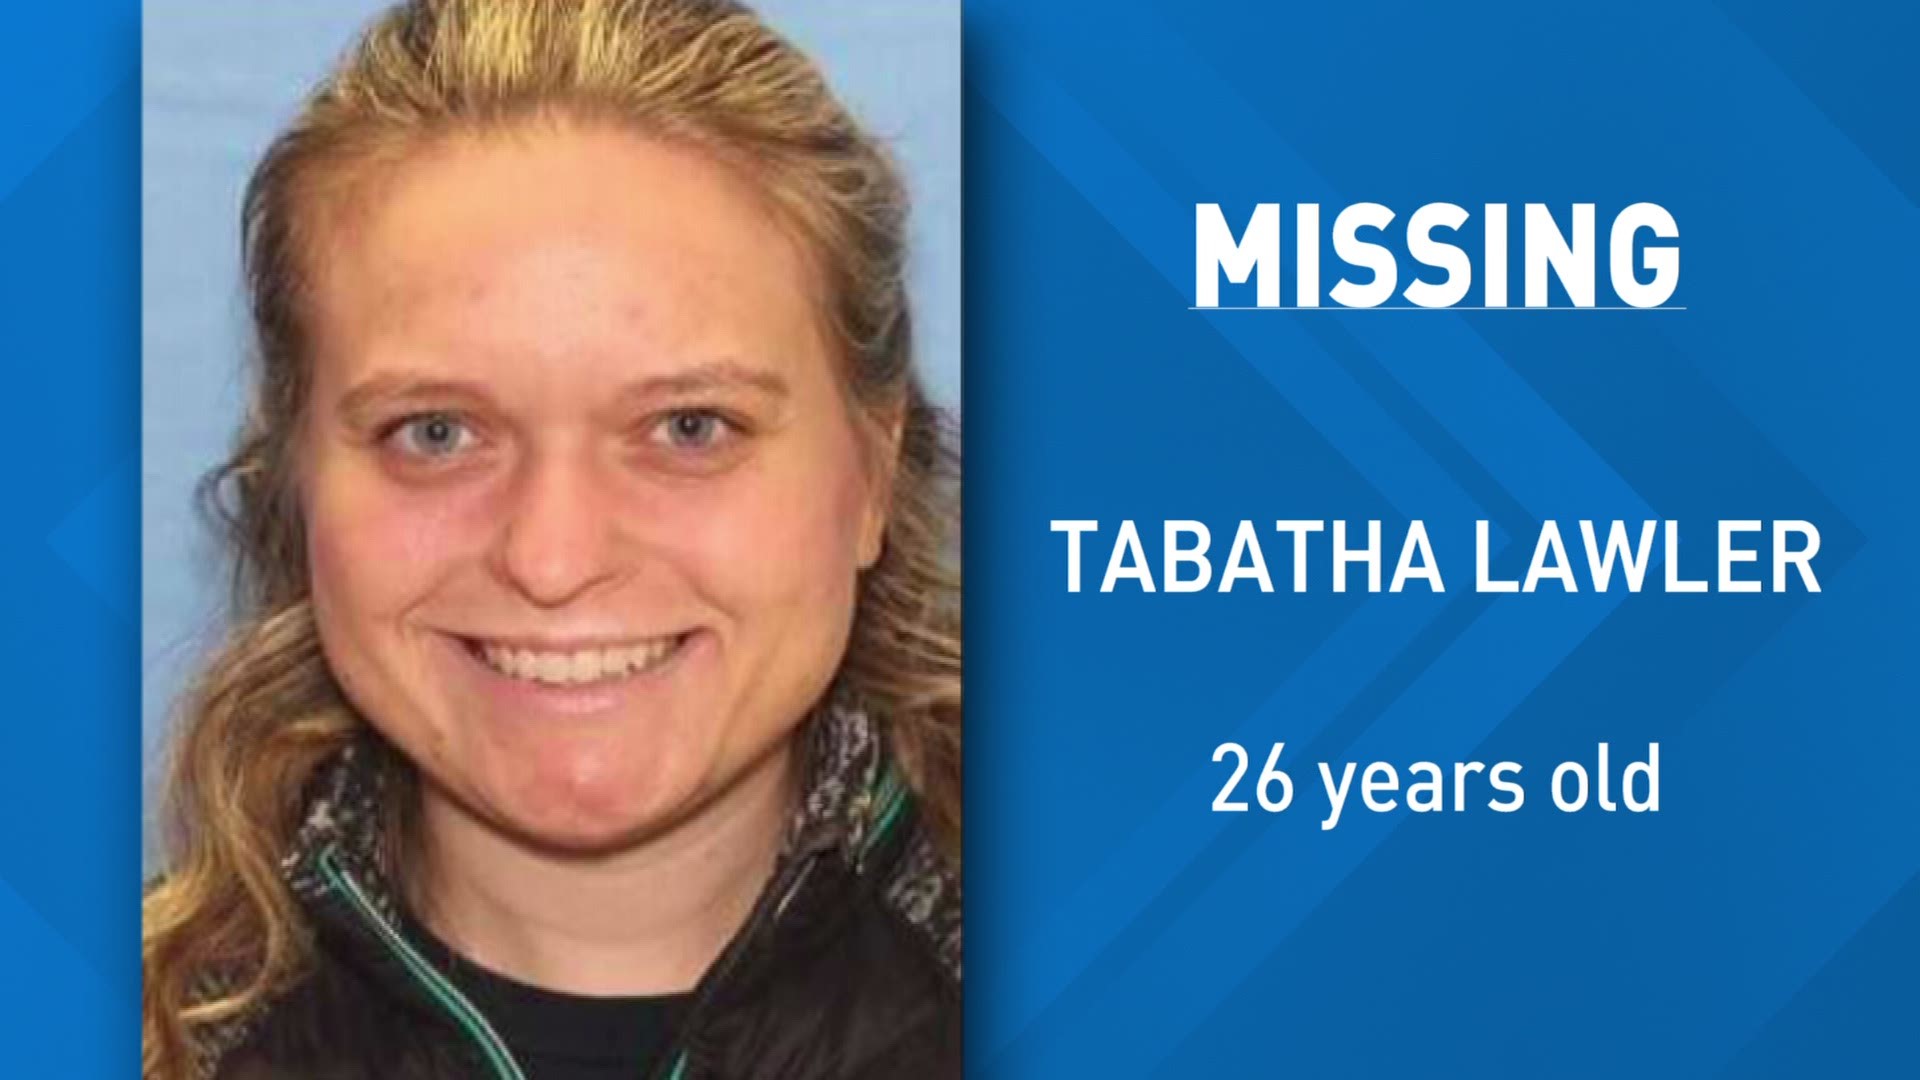 26-year-old Tabatha Lawler walked away from her home near Dash Point State Park.  Police say she is developmentally challenged.